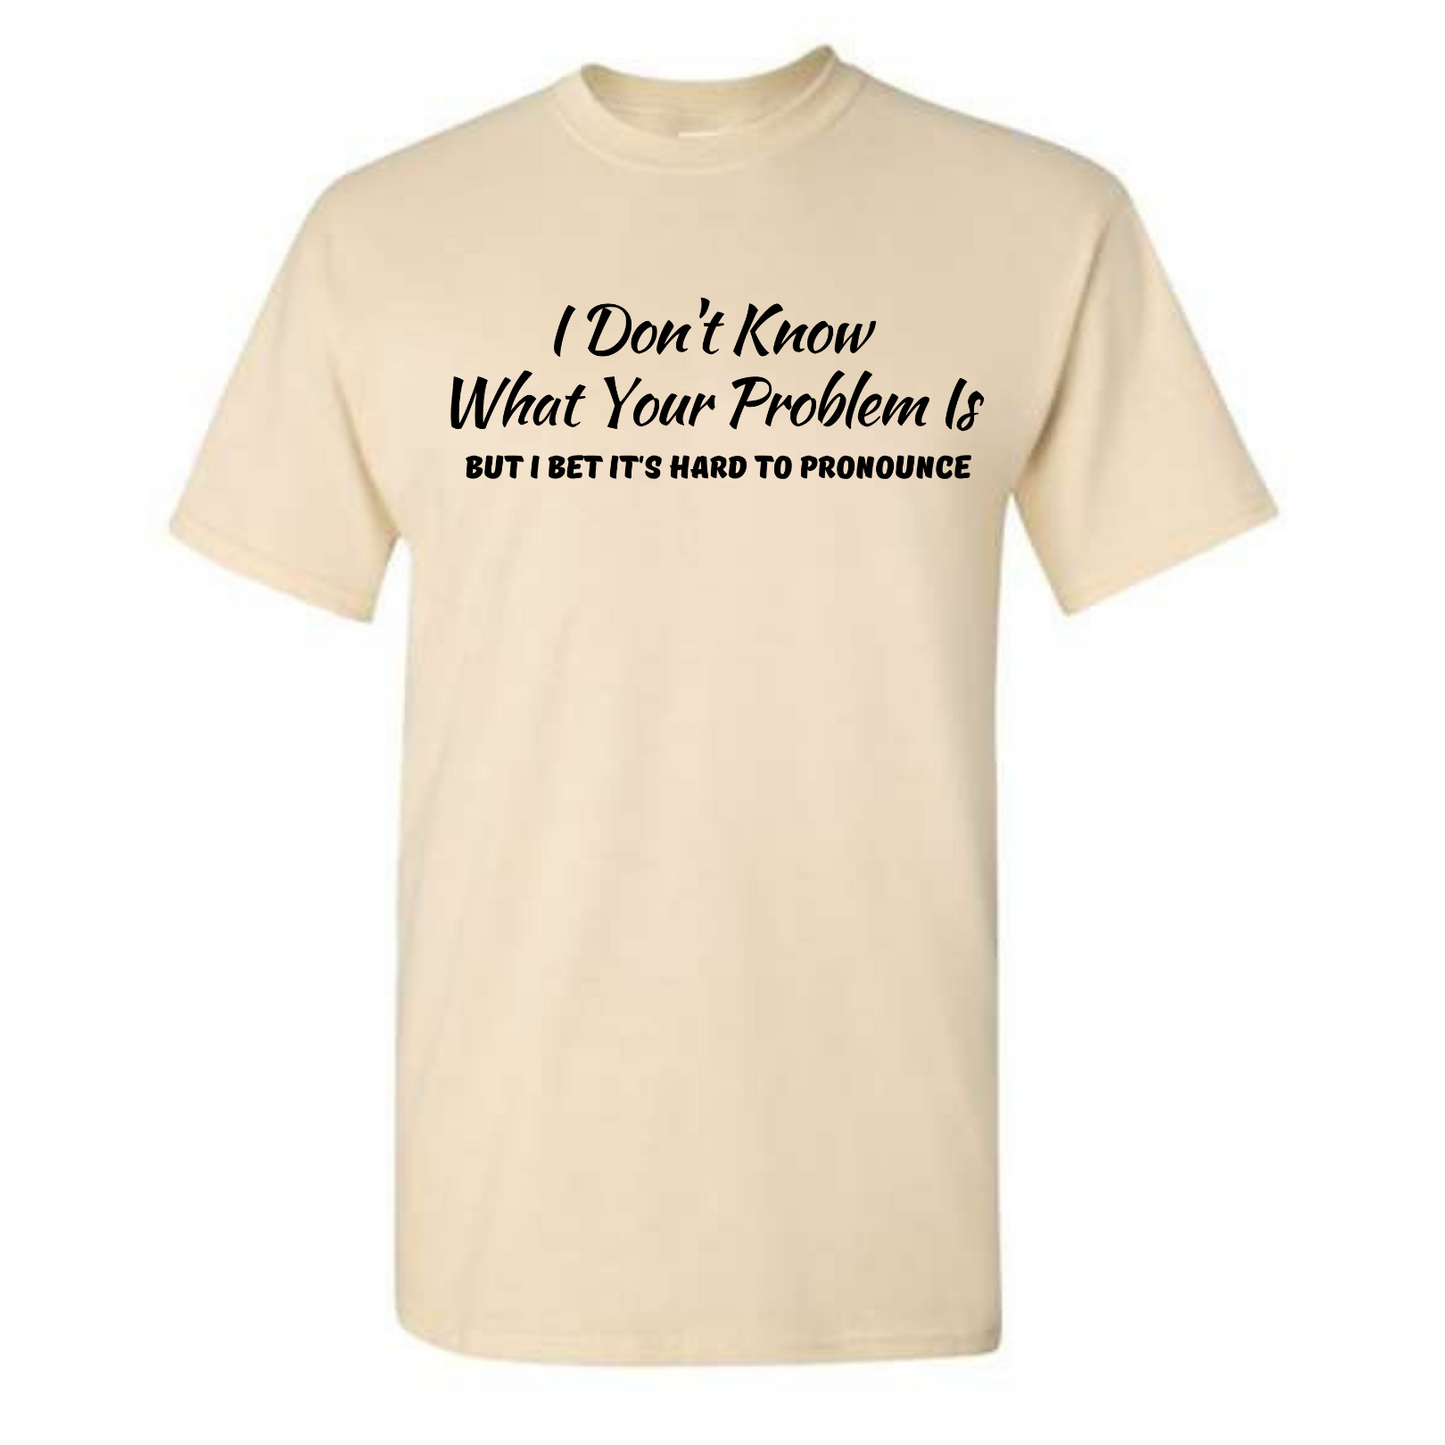 I Don't Know What Your Problem Is - Graphic T-Shirt - Mister Snarky's